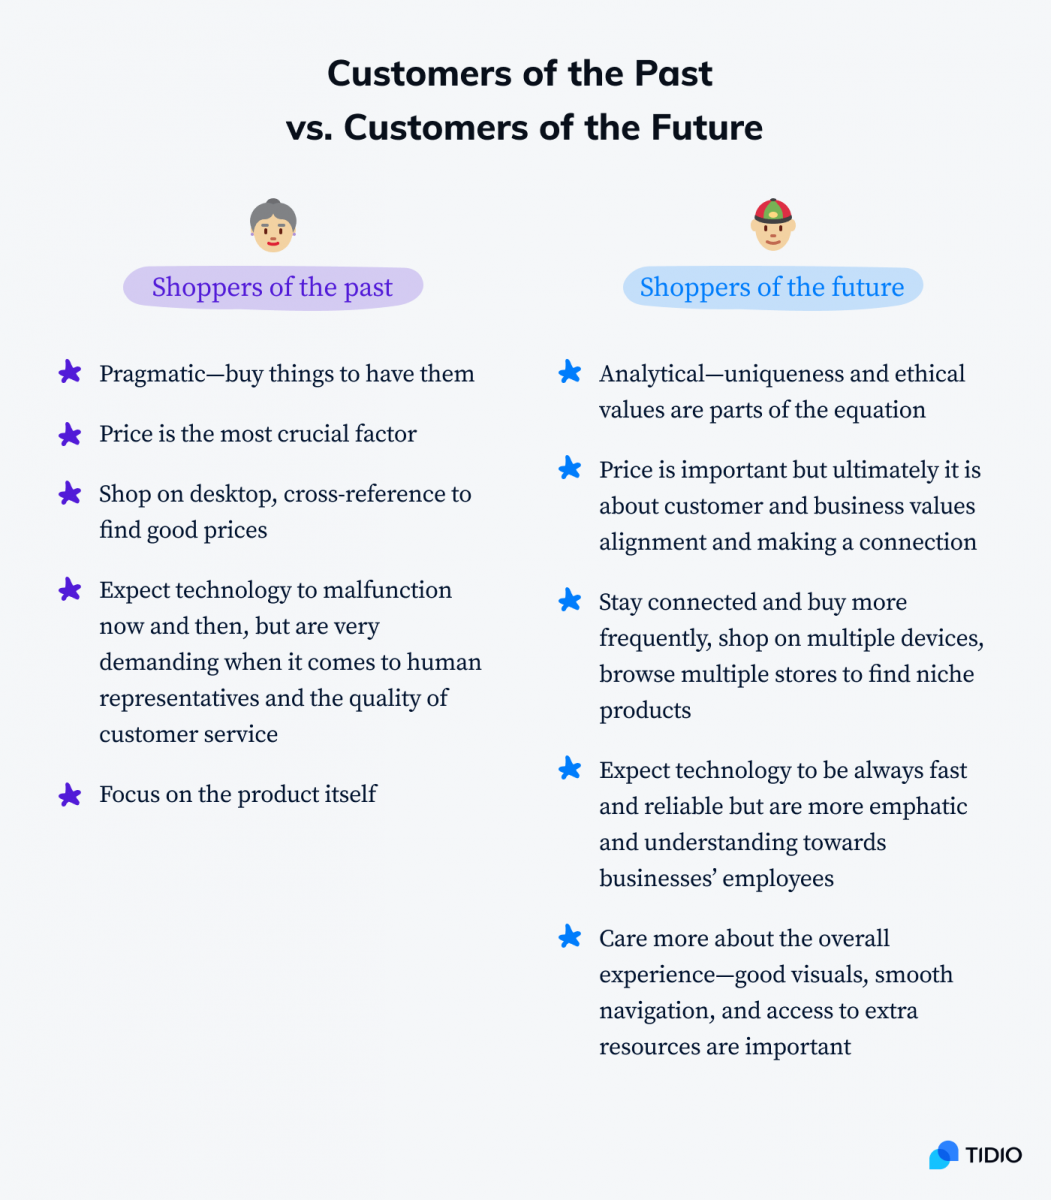 Customers of the past vs. customers of the future